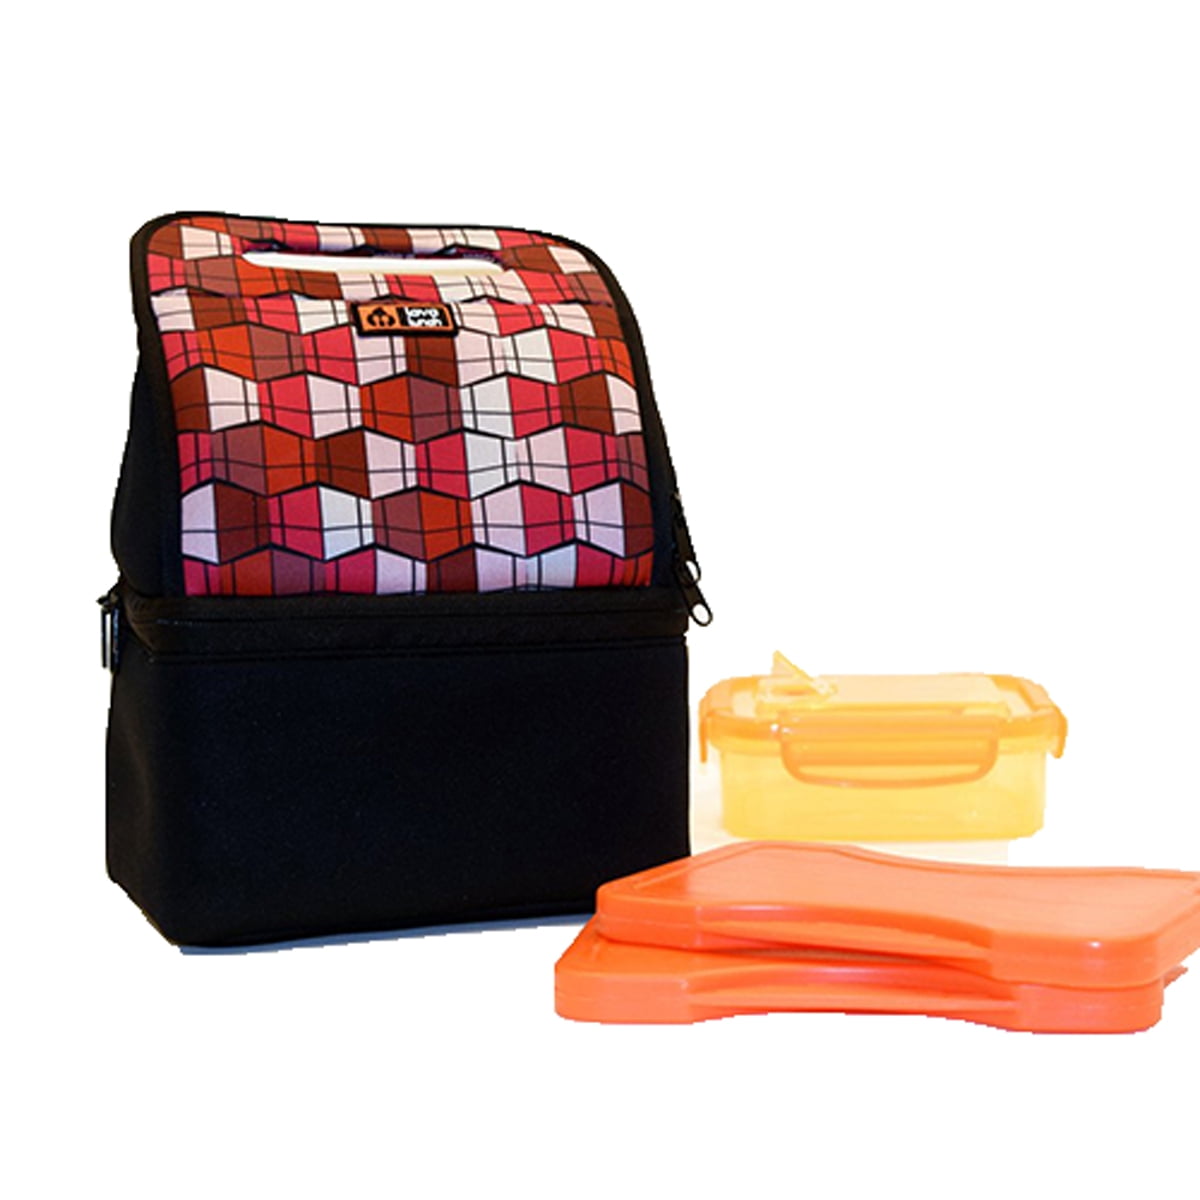 Lava Lunch Heated Lunchbox